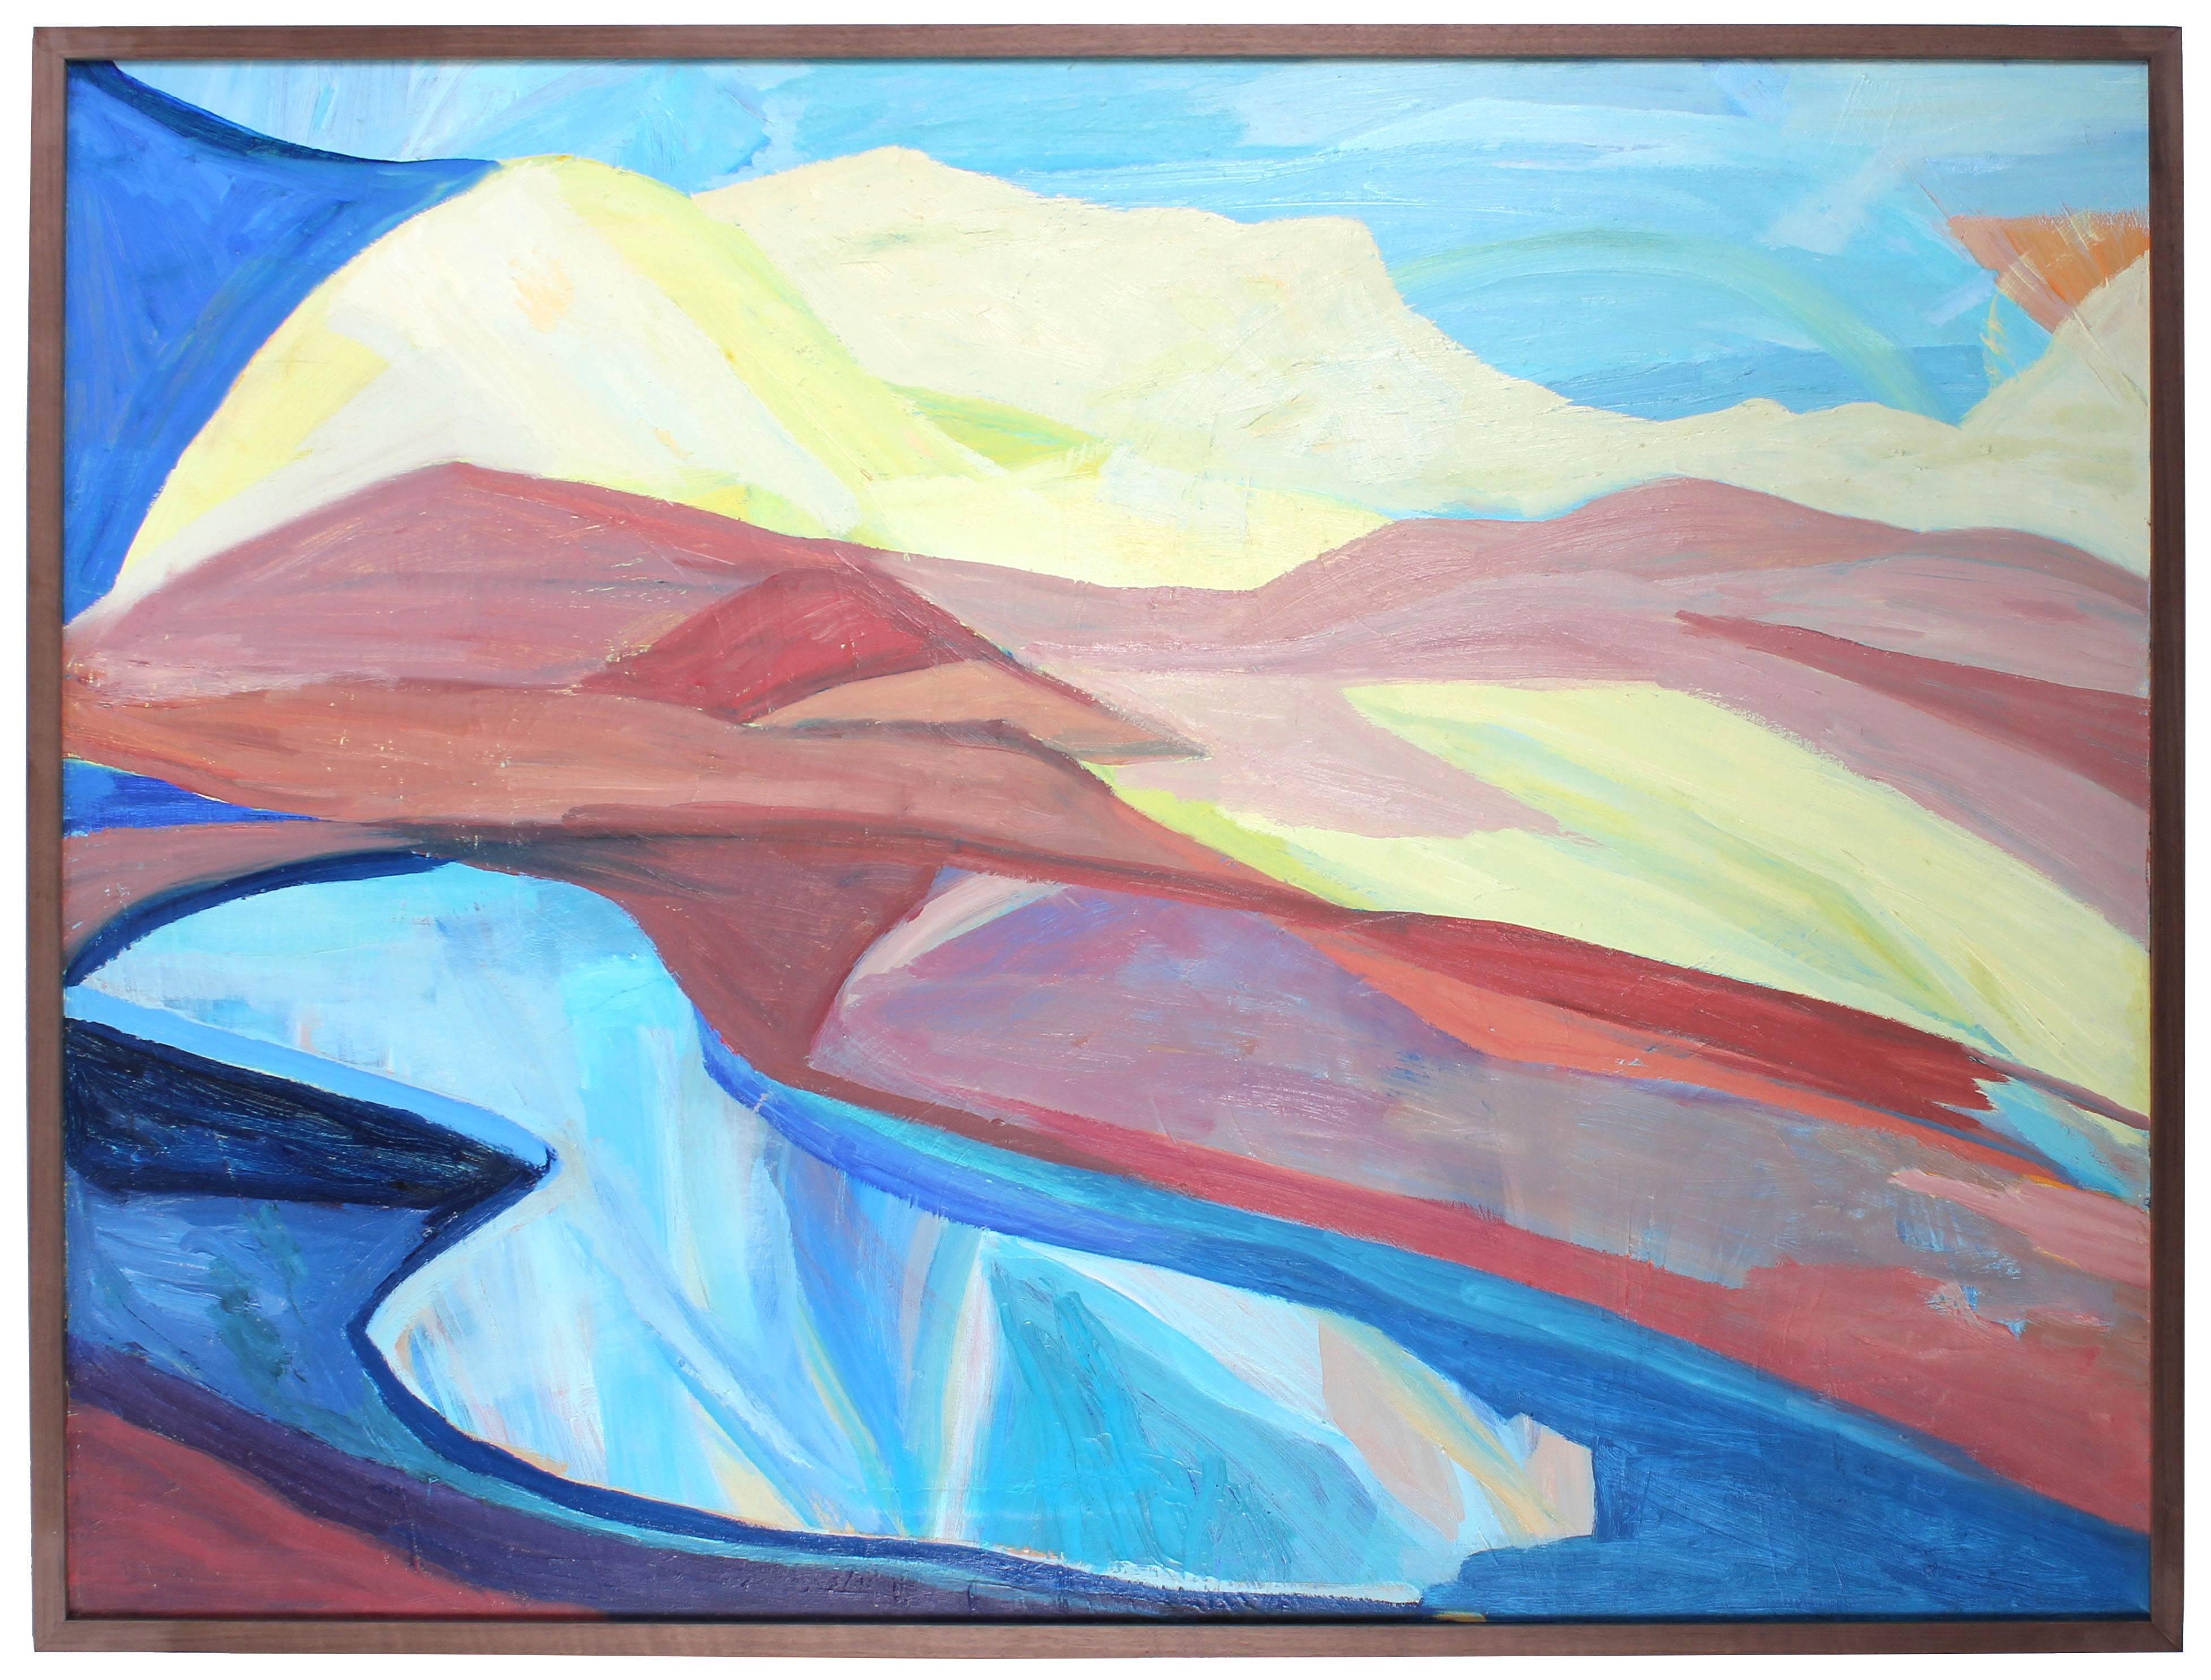 Georgette London Owens Abstract Painting - "The Rainbow" Large Abstract Oil Painting, 1987